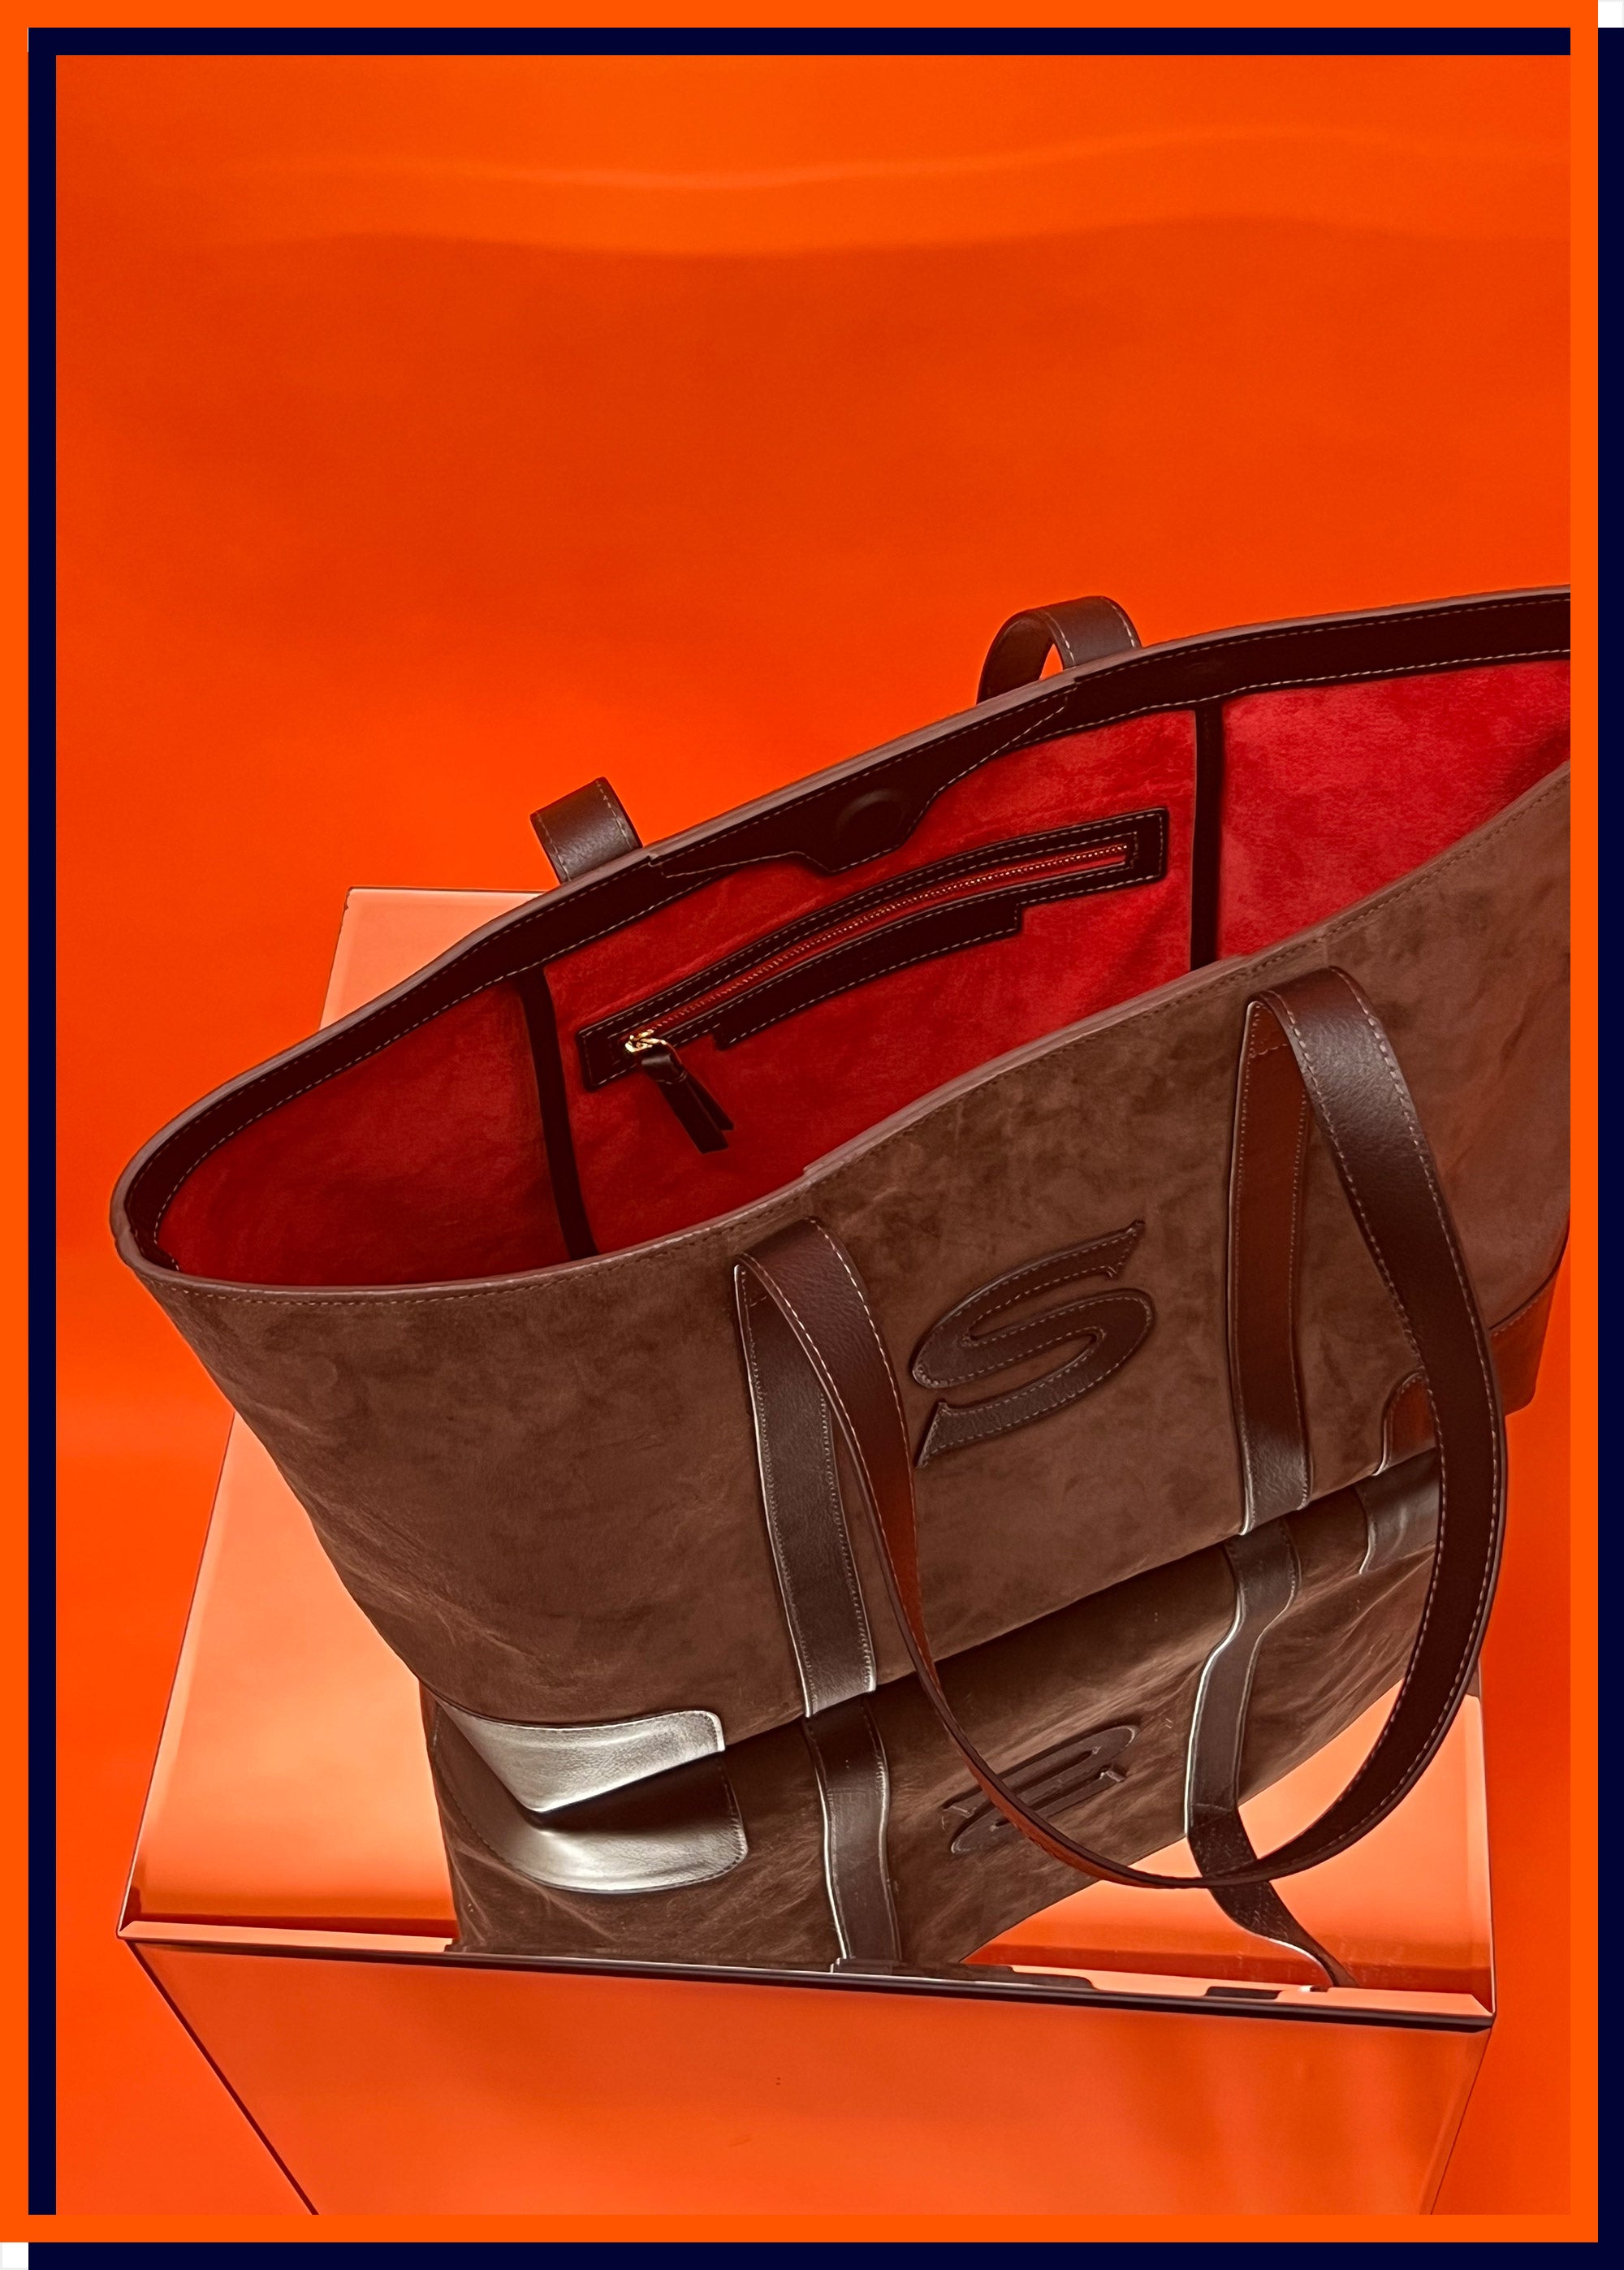 Letter 'S' The Suede Tote Bag, Chocolate, Red lining